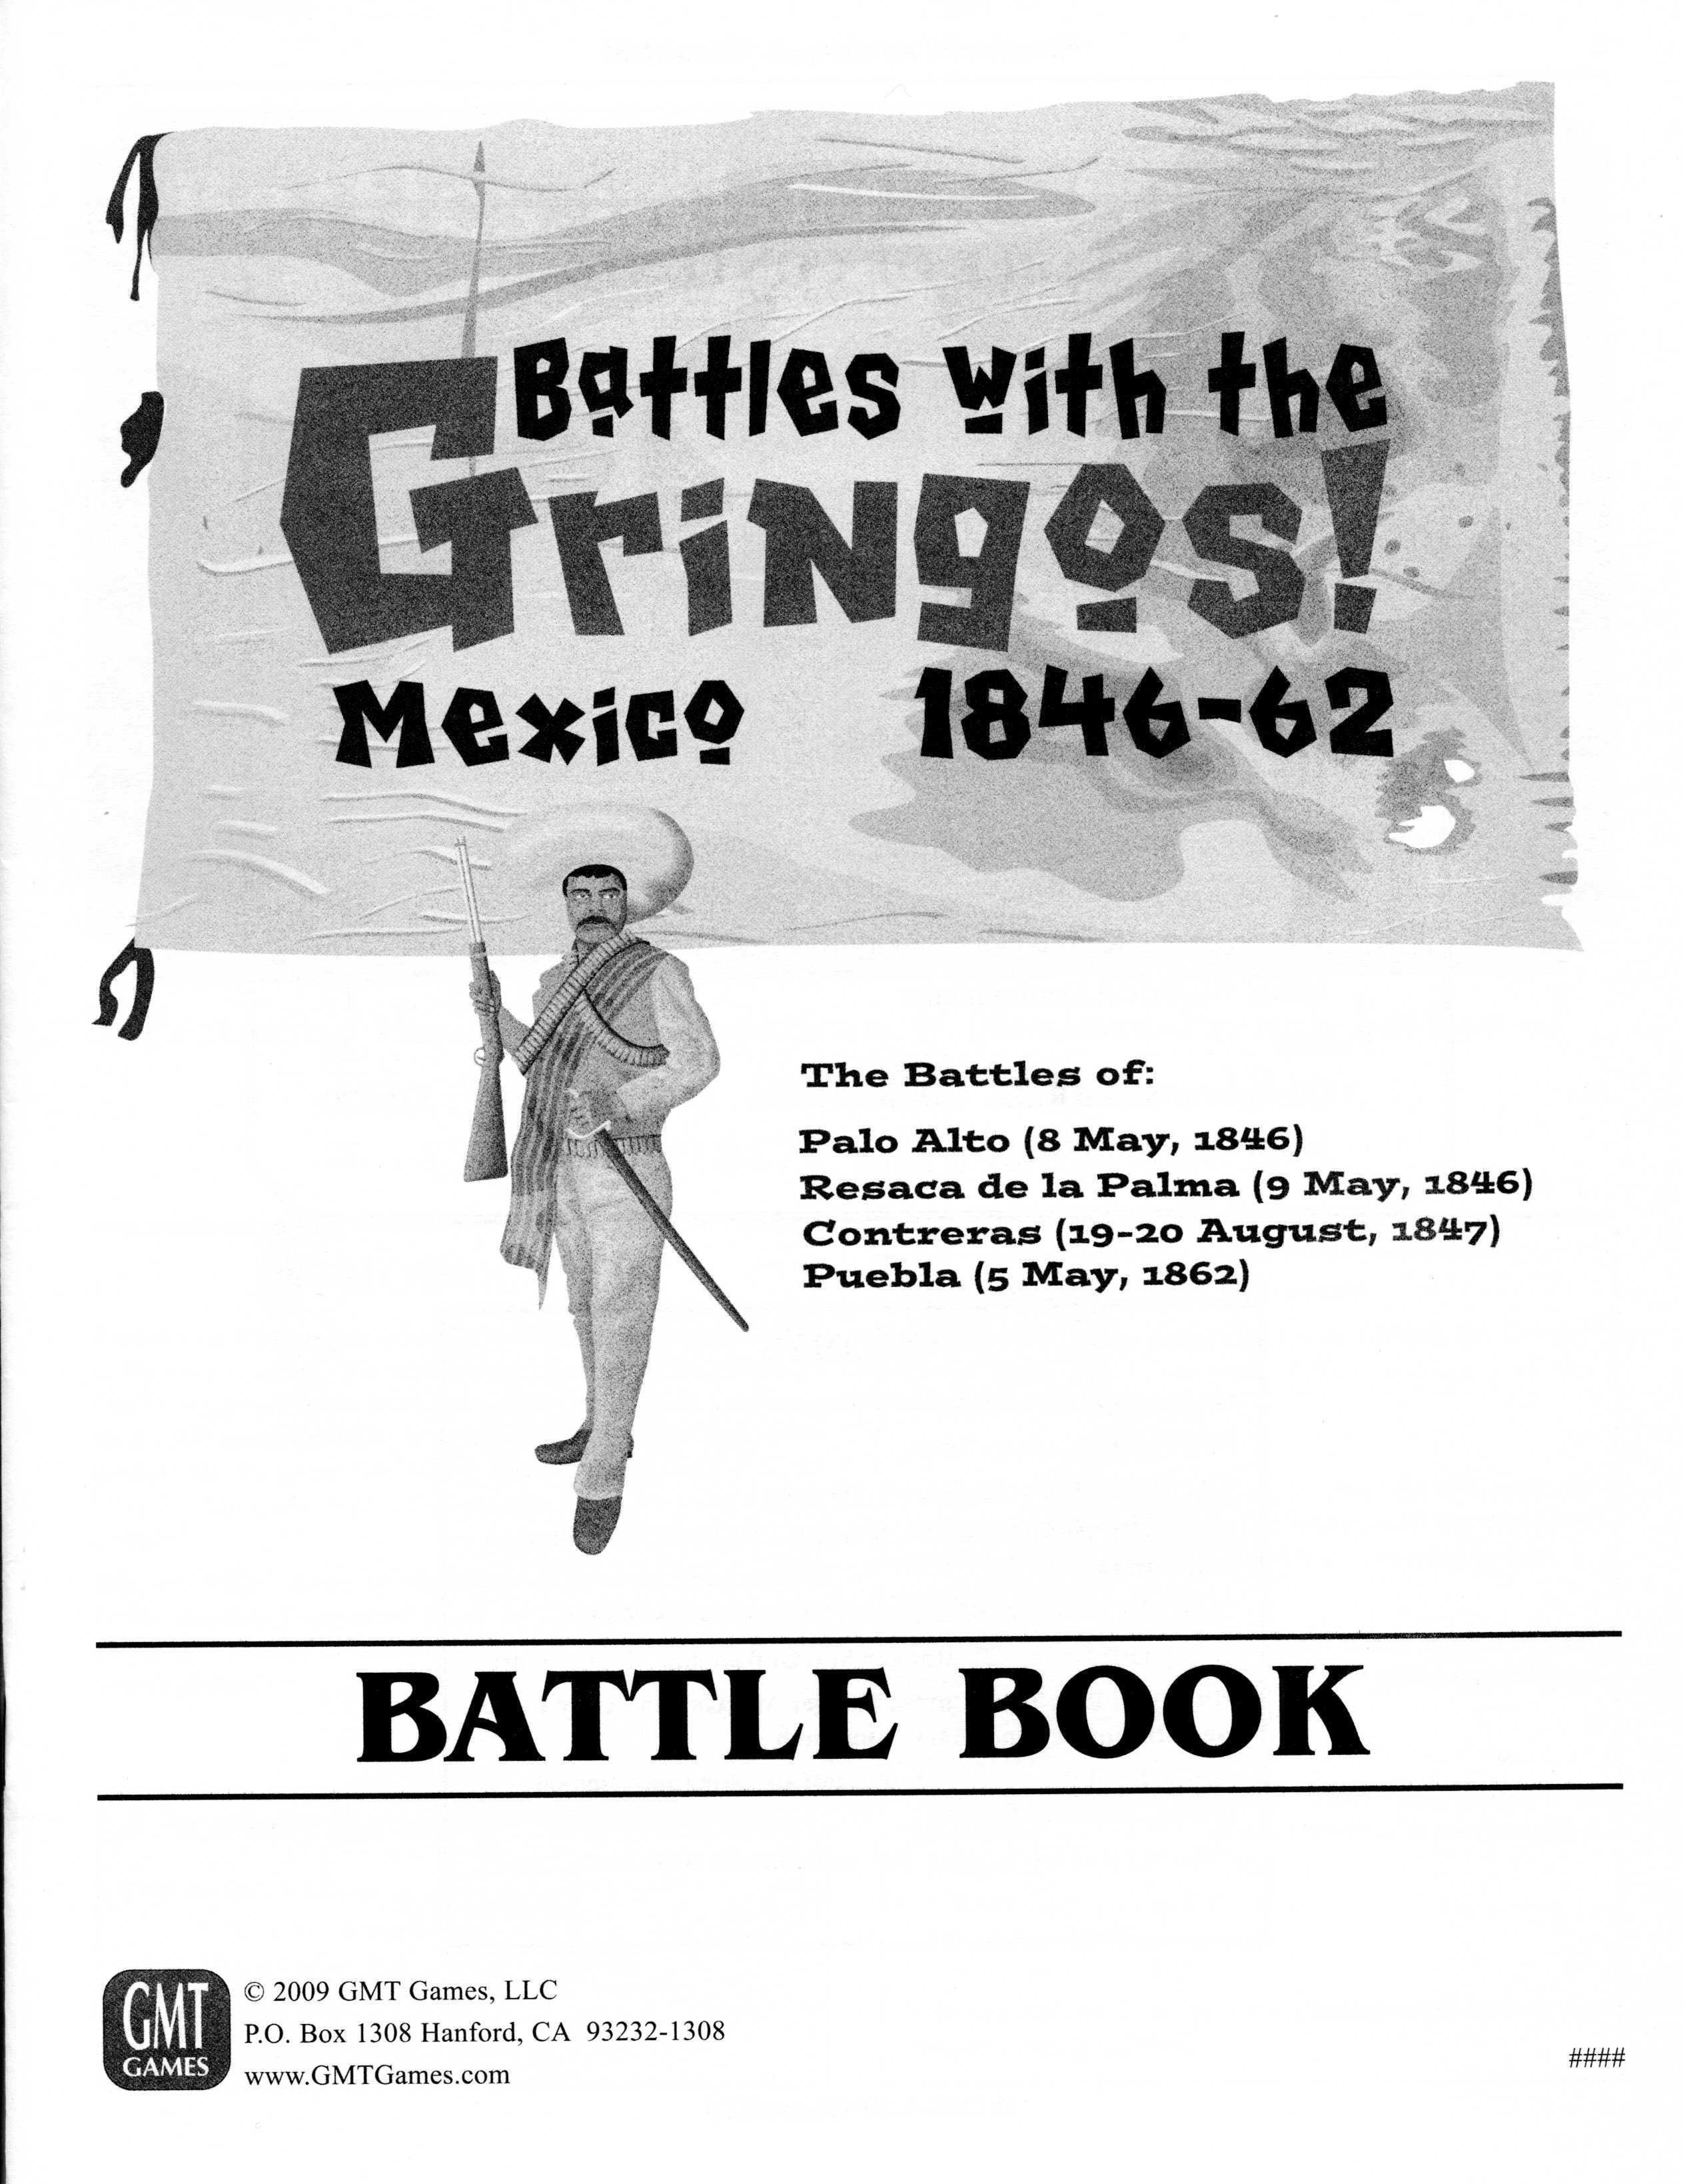 Battles with the Gringos, Mexico 1846-62